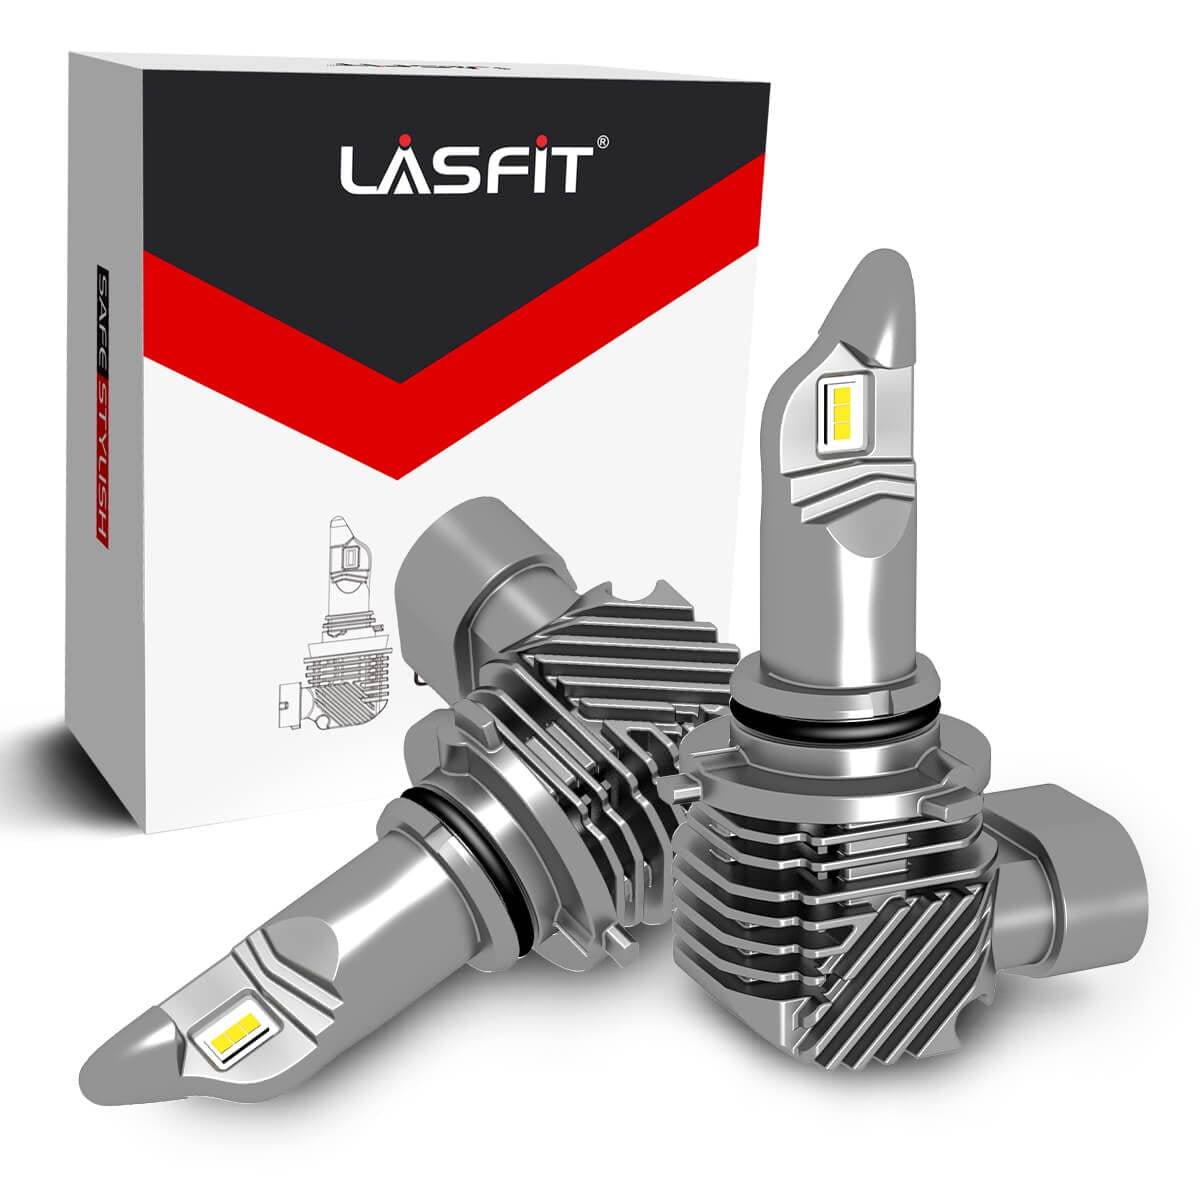 LASFIT 9005 HB3 LED Headlight Bulbs for High Beam Halogen Replacement,6000K  4000LM 40W, Plug & Play